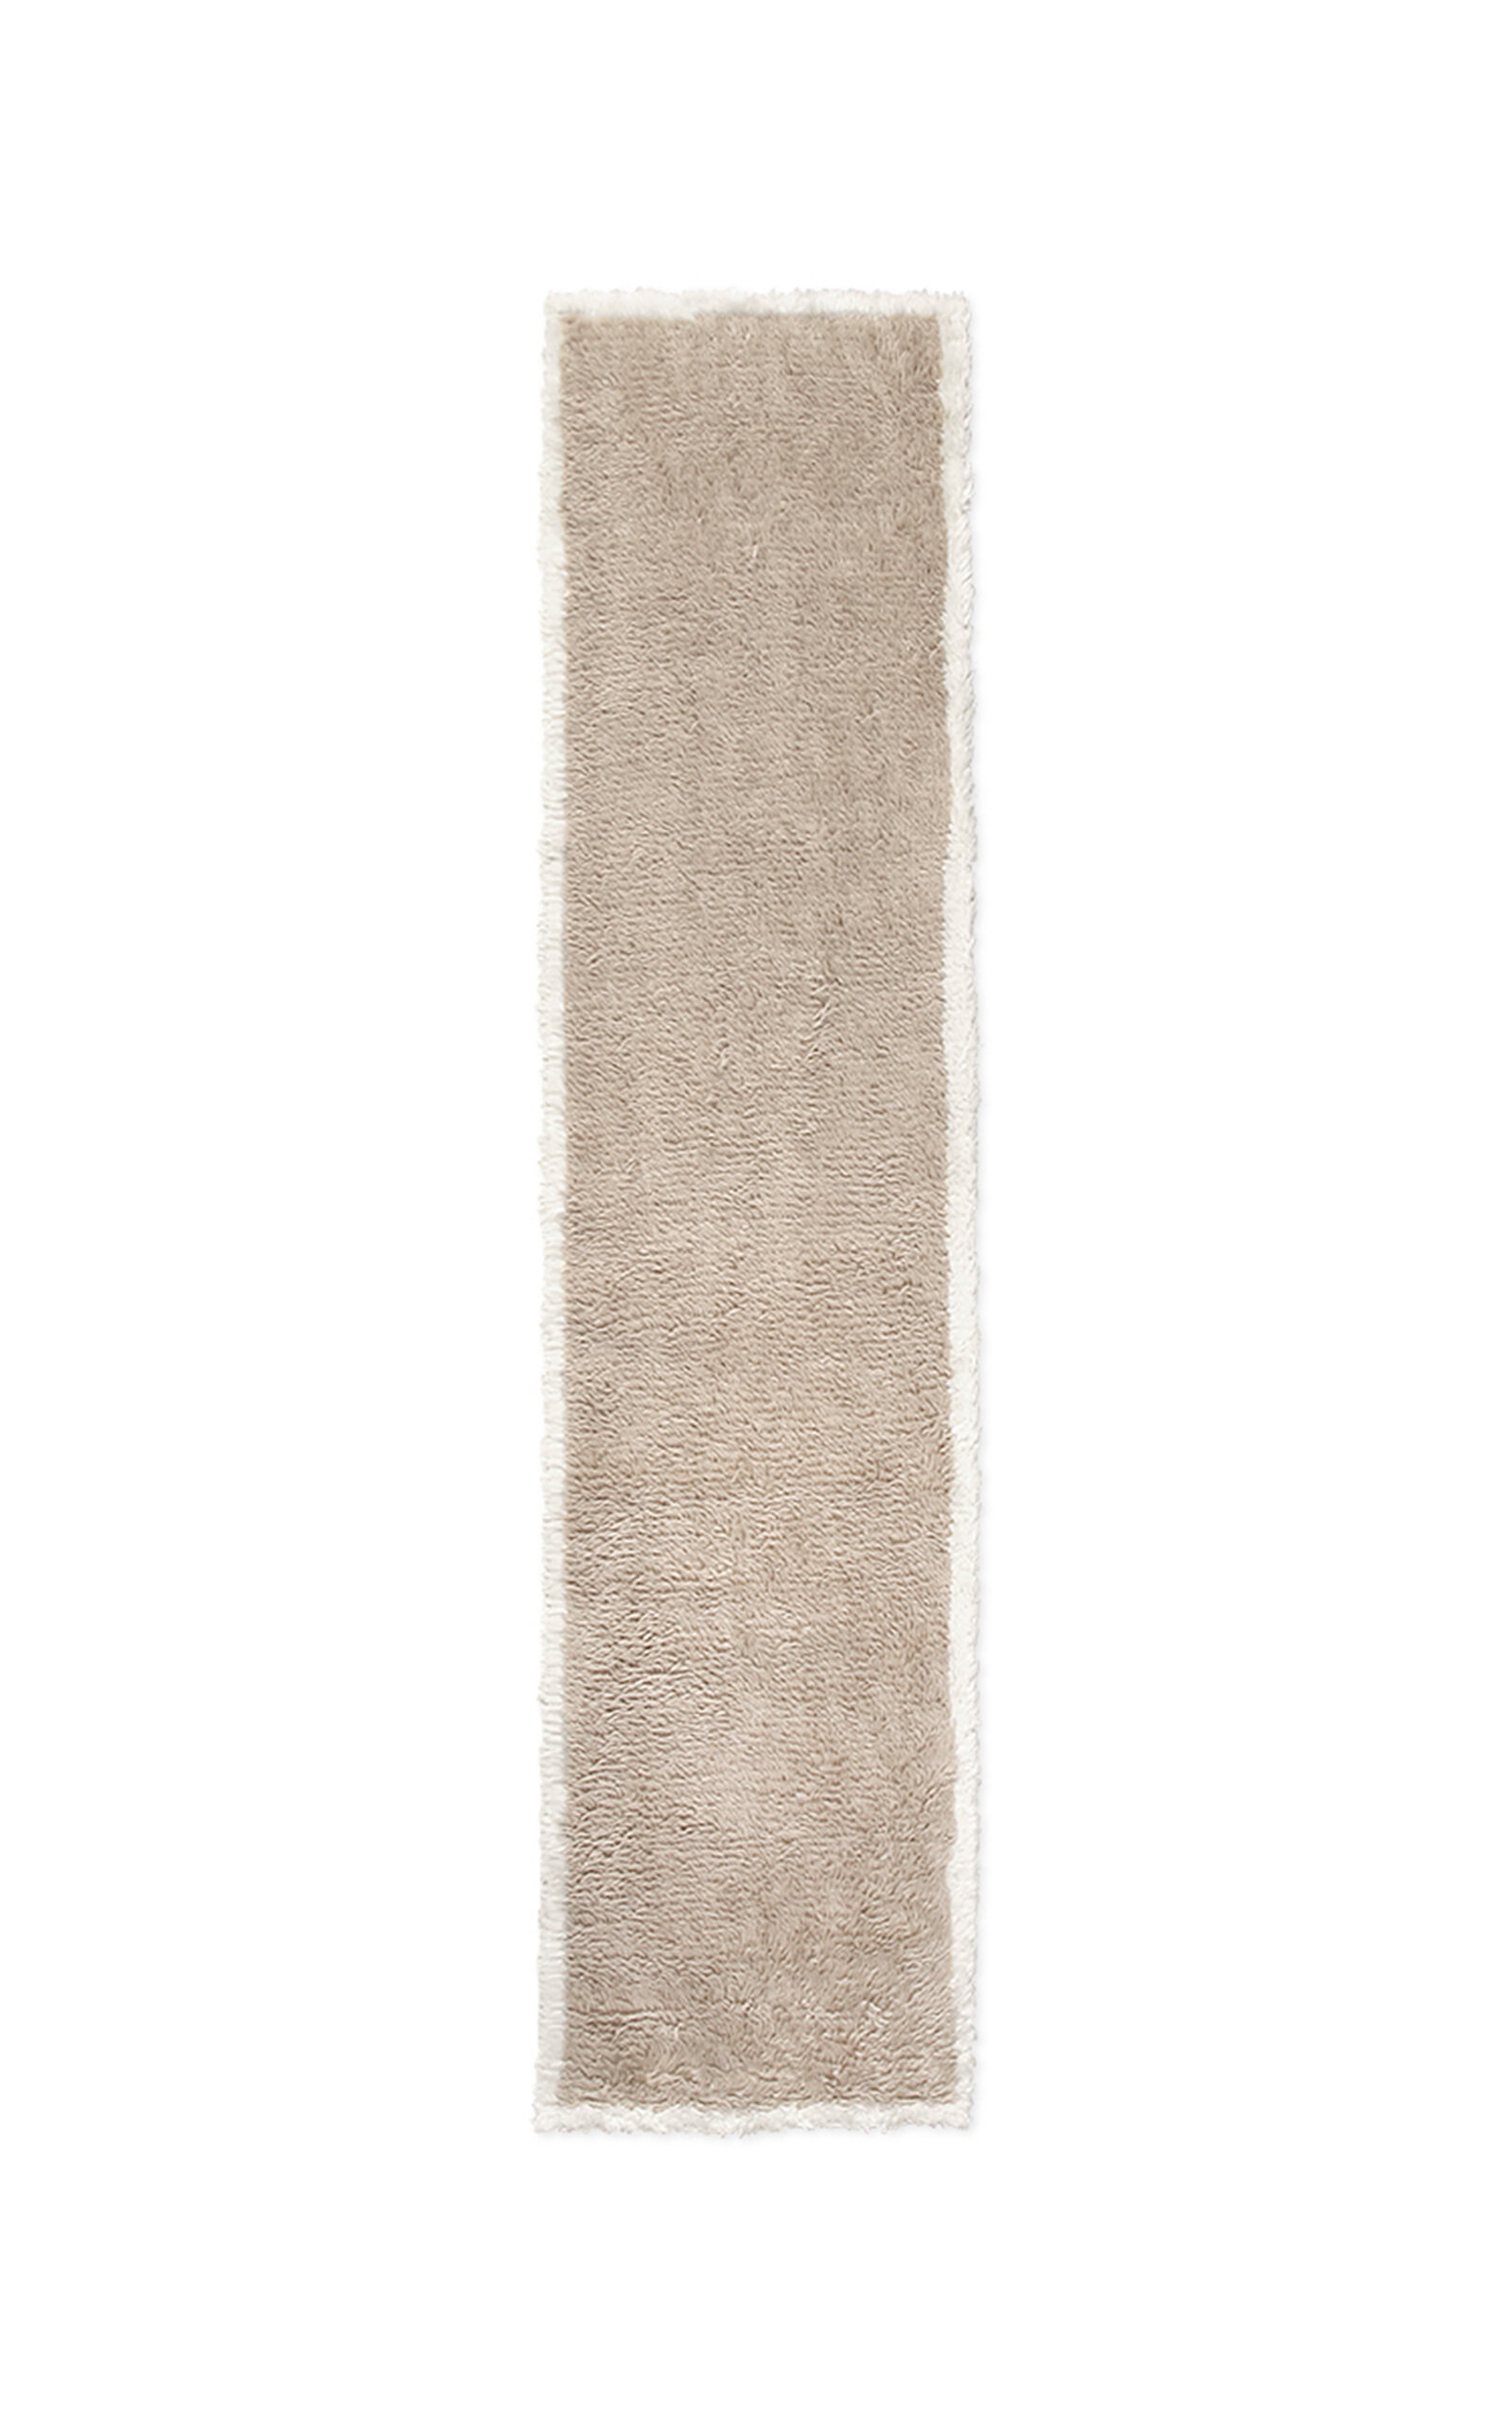 Nordic Knots Shaggy Runner By ; Shaggy Area Rug In Sand/cream; Size 2.5' X 16' In Taupe